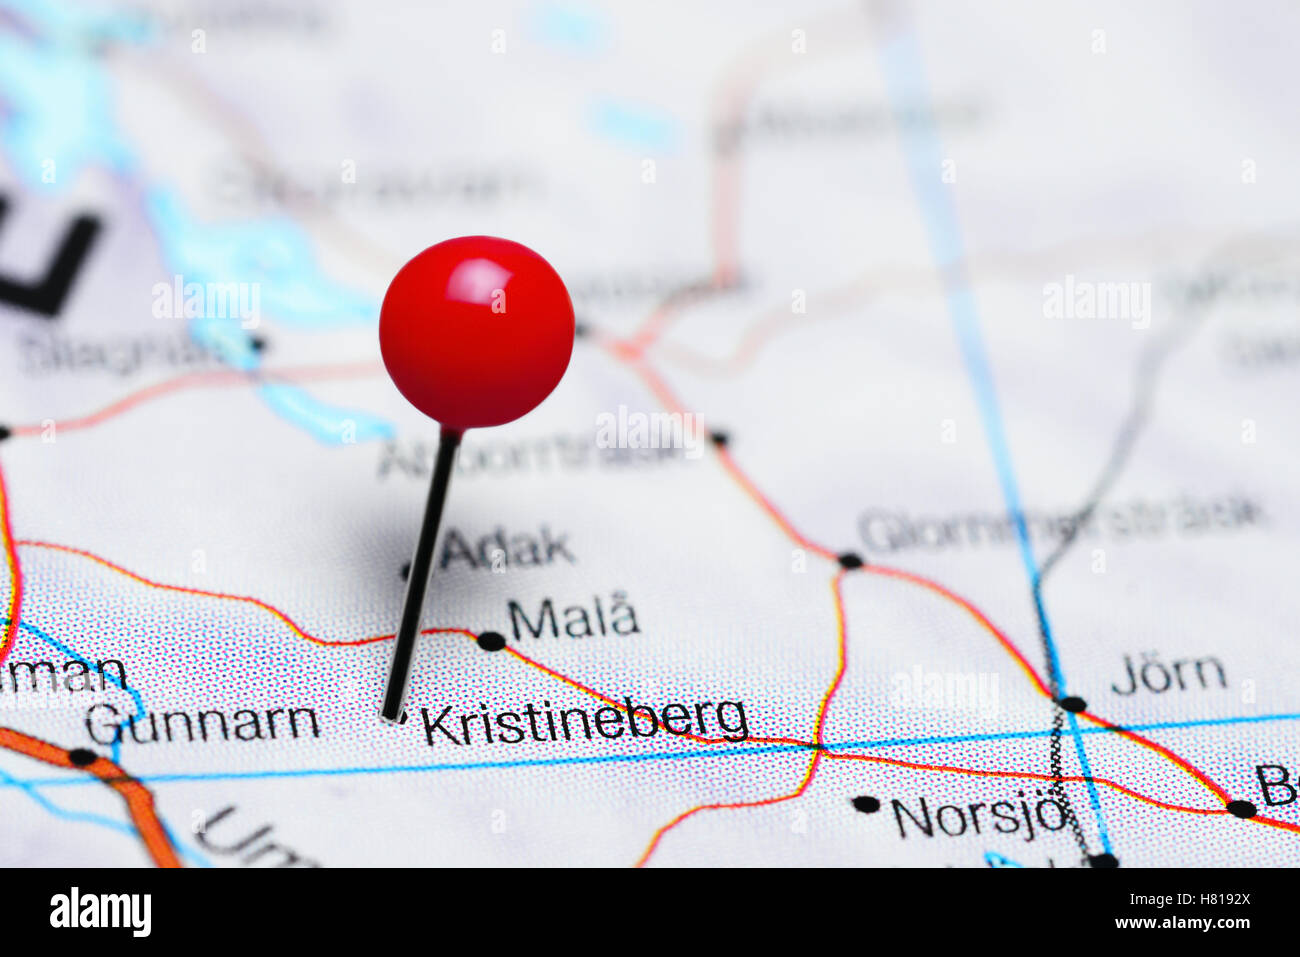 Kristineberg pinned on a map of Sweden Stock Photo